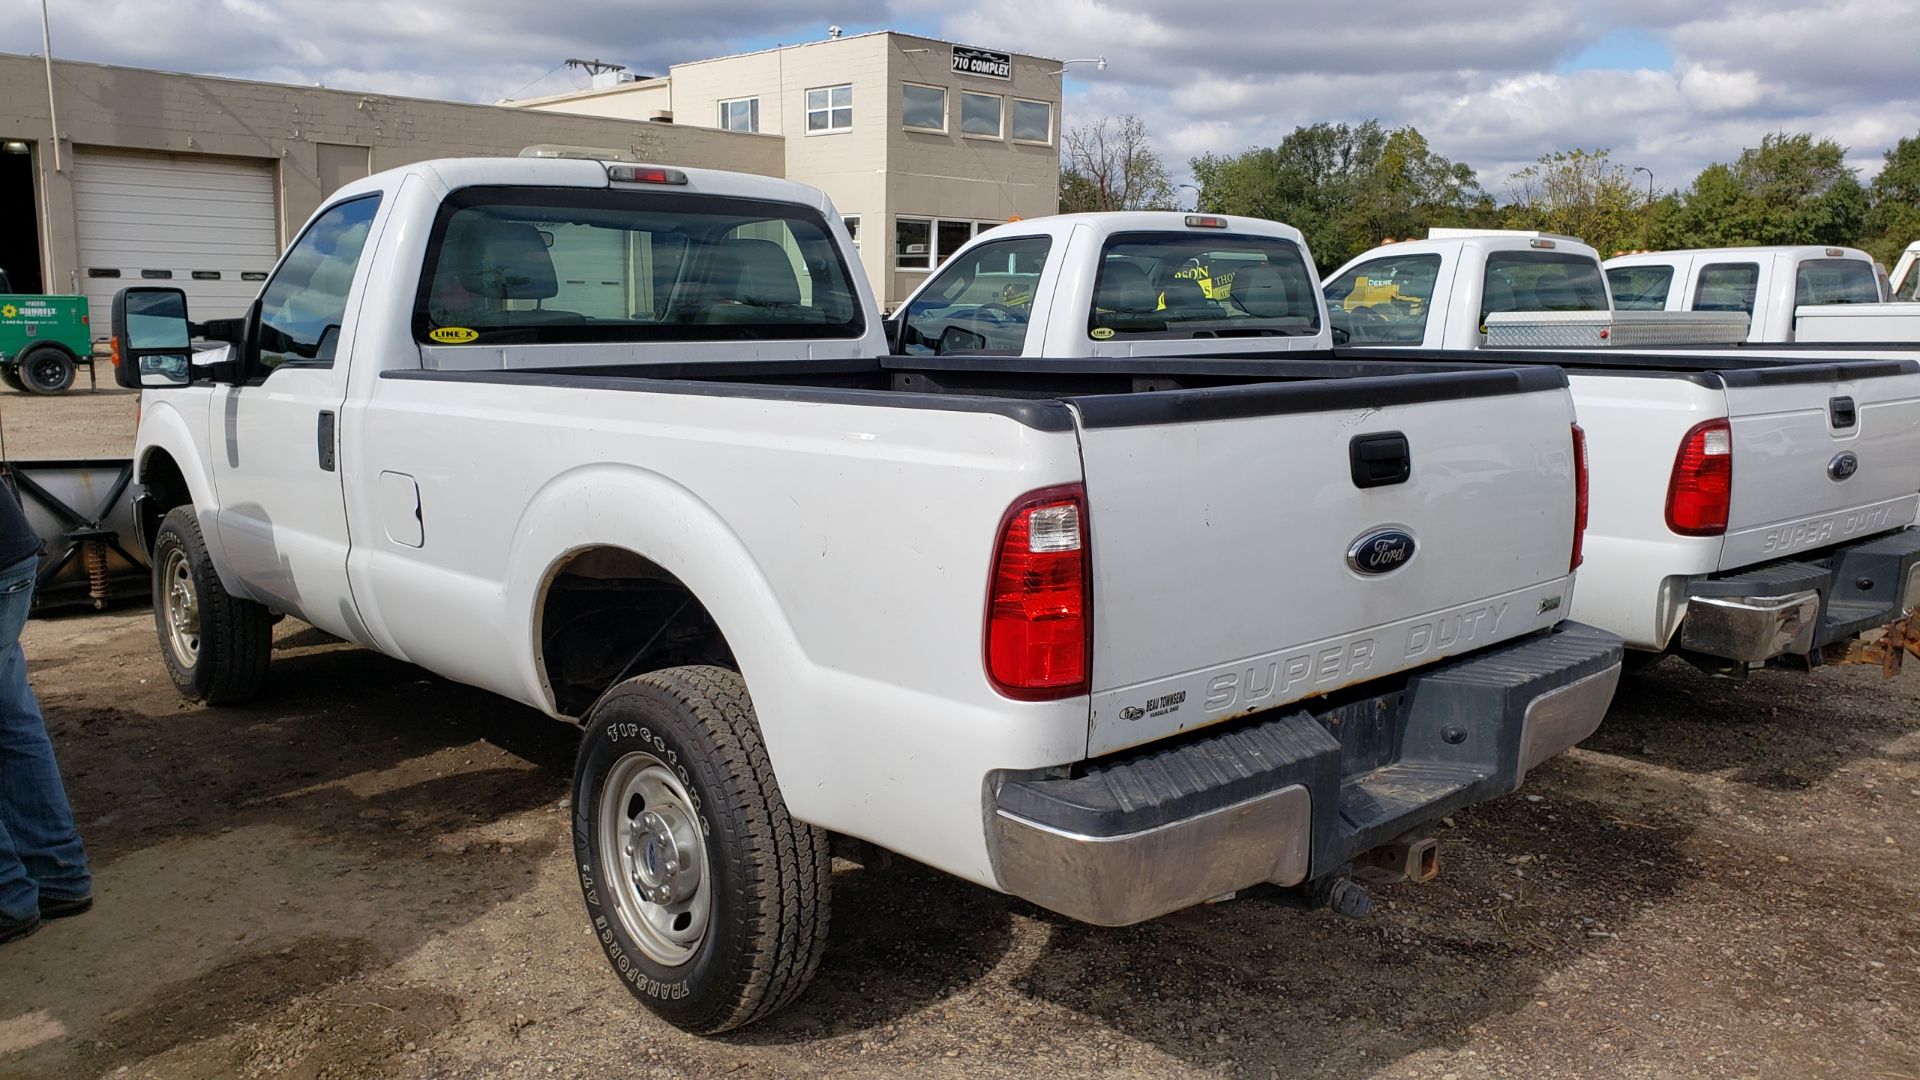 2012 Ford F350 Super Duty Pickup Truck, 8’ Bed, 4x4, 6.2 Liter Gasoline Engine, Automatic, Air, - Image 6 of 19